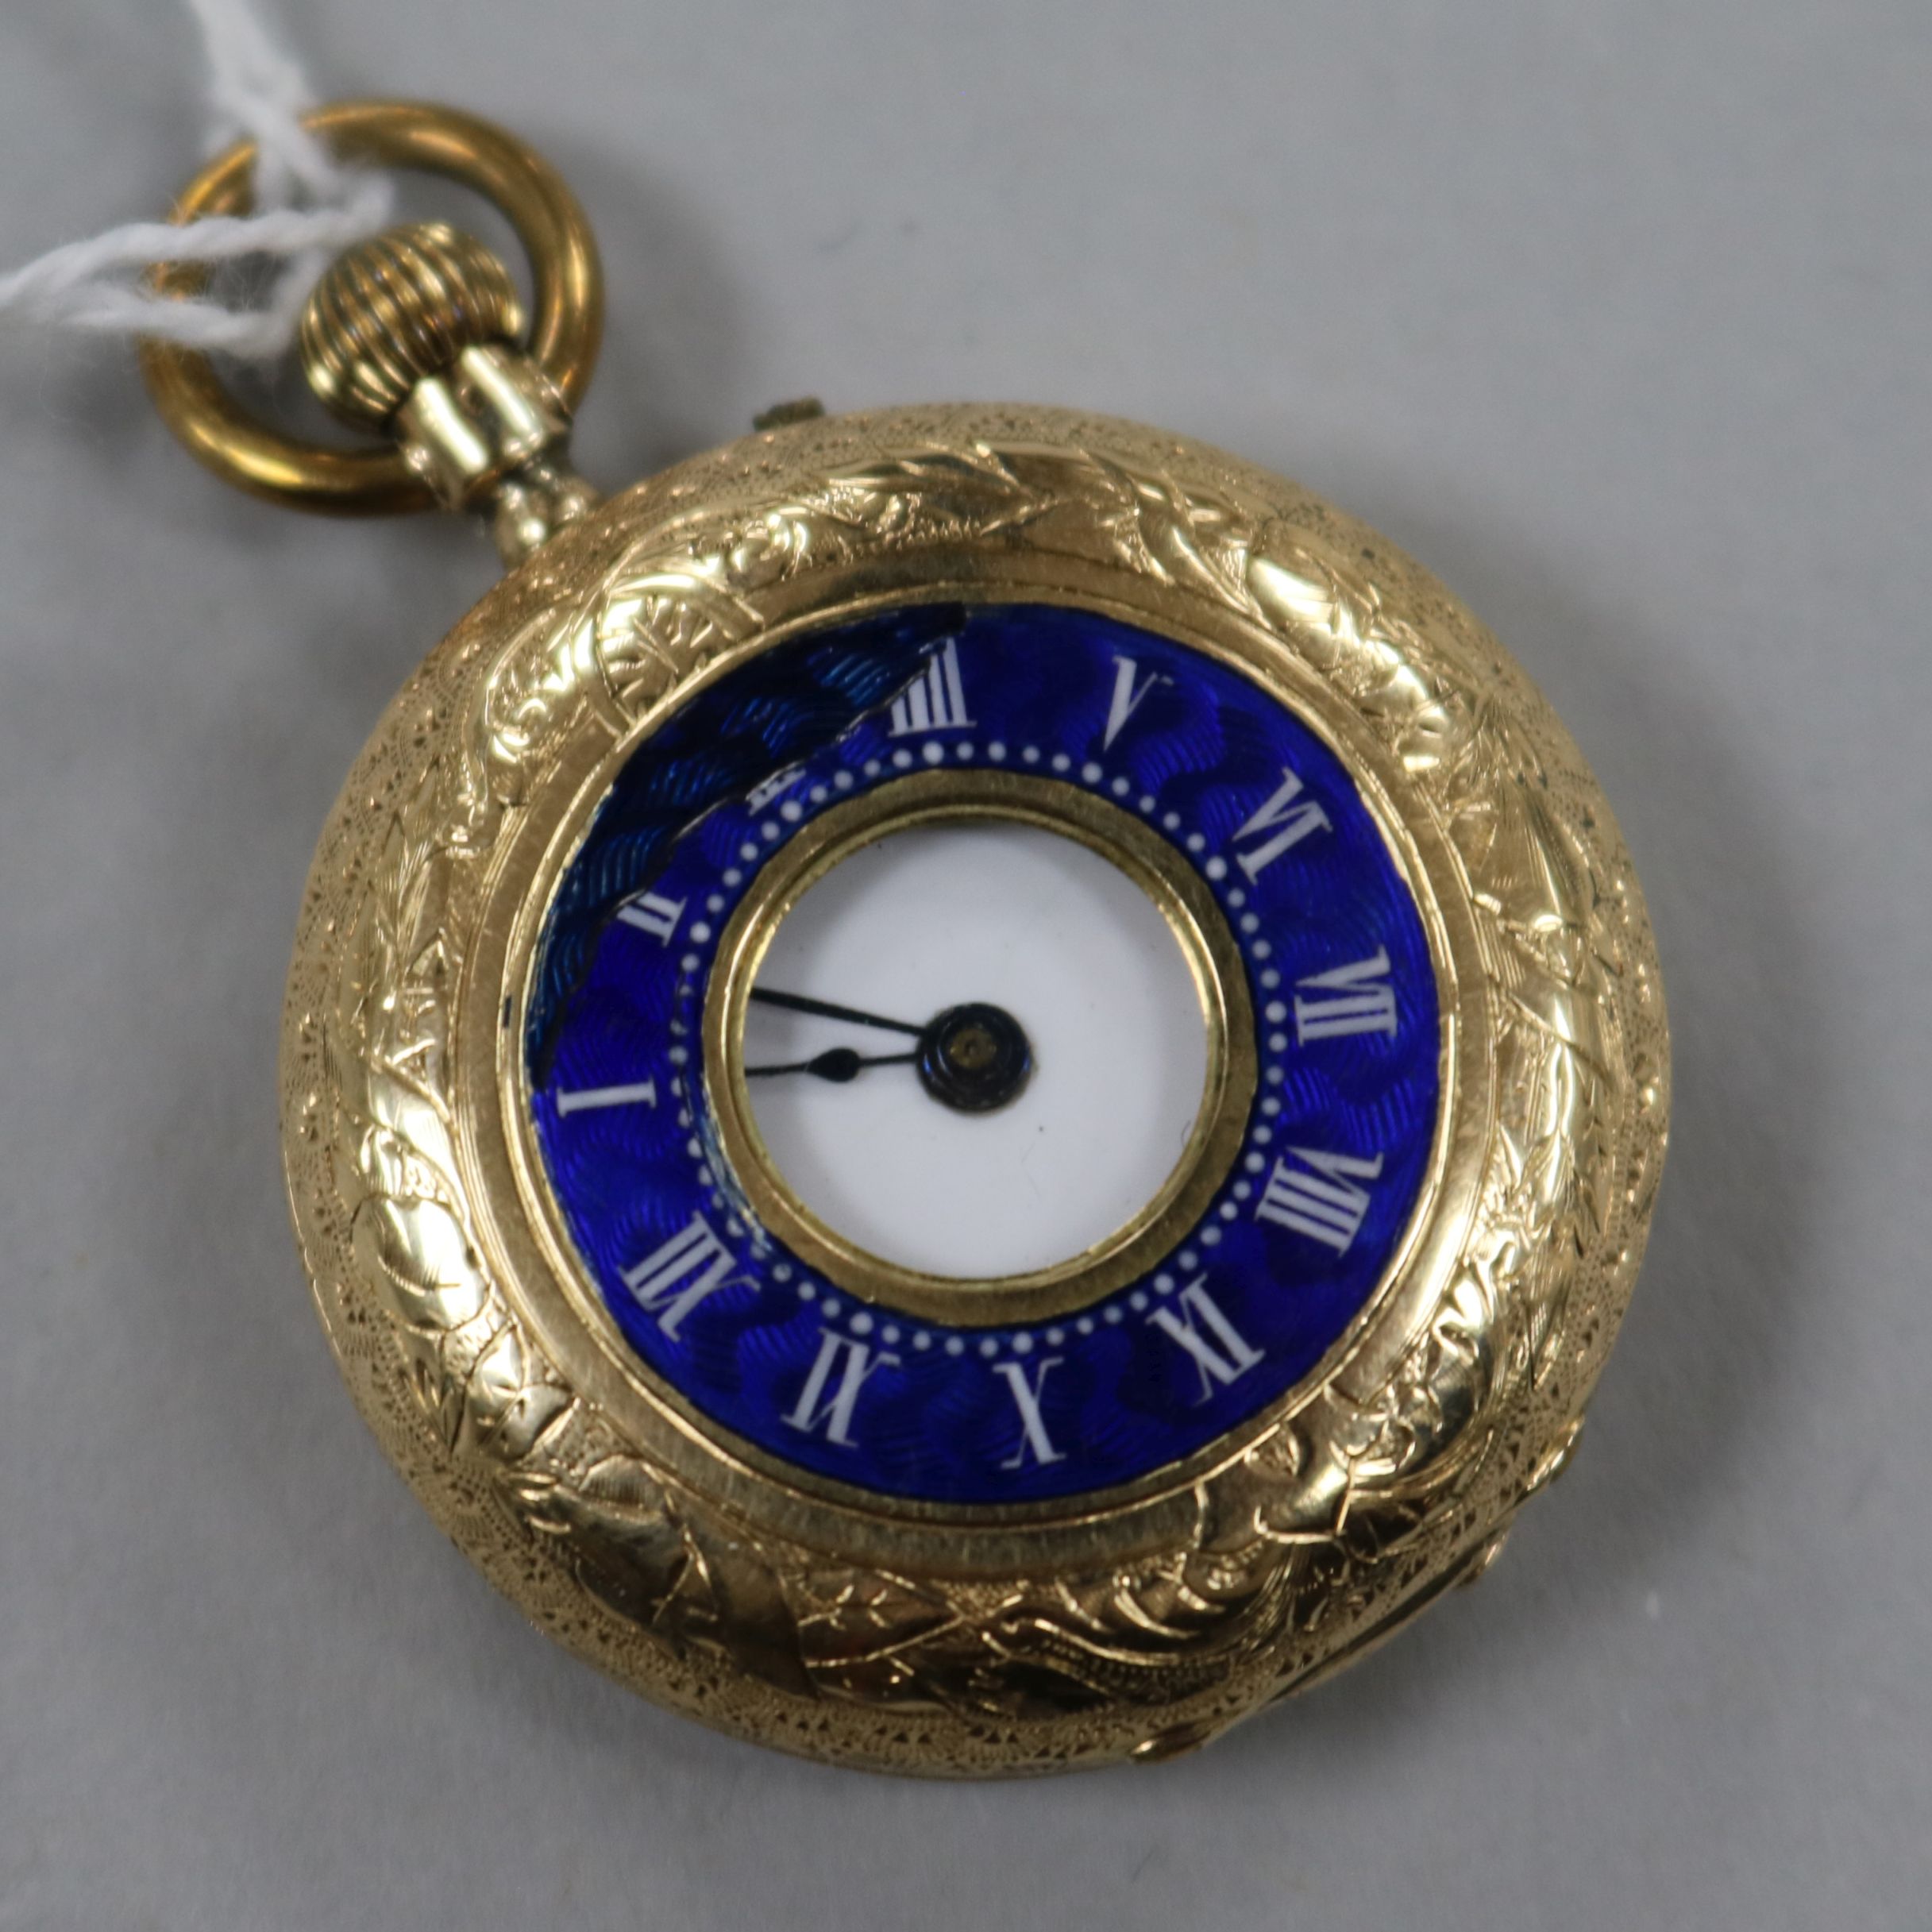 A 14ct gold and blue enamel half hunter fob watch.